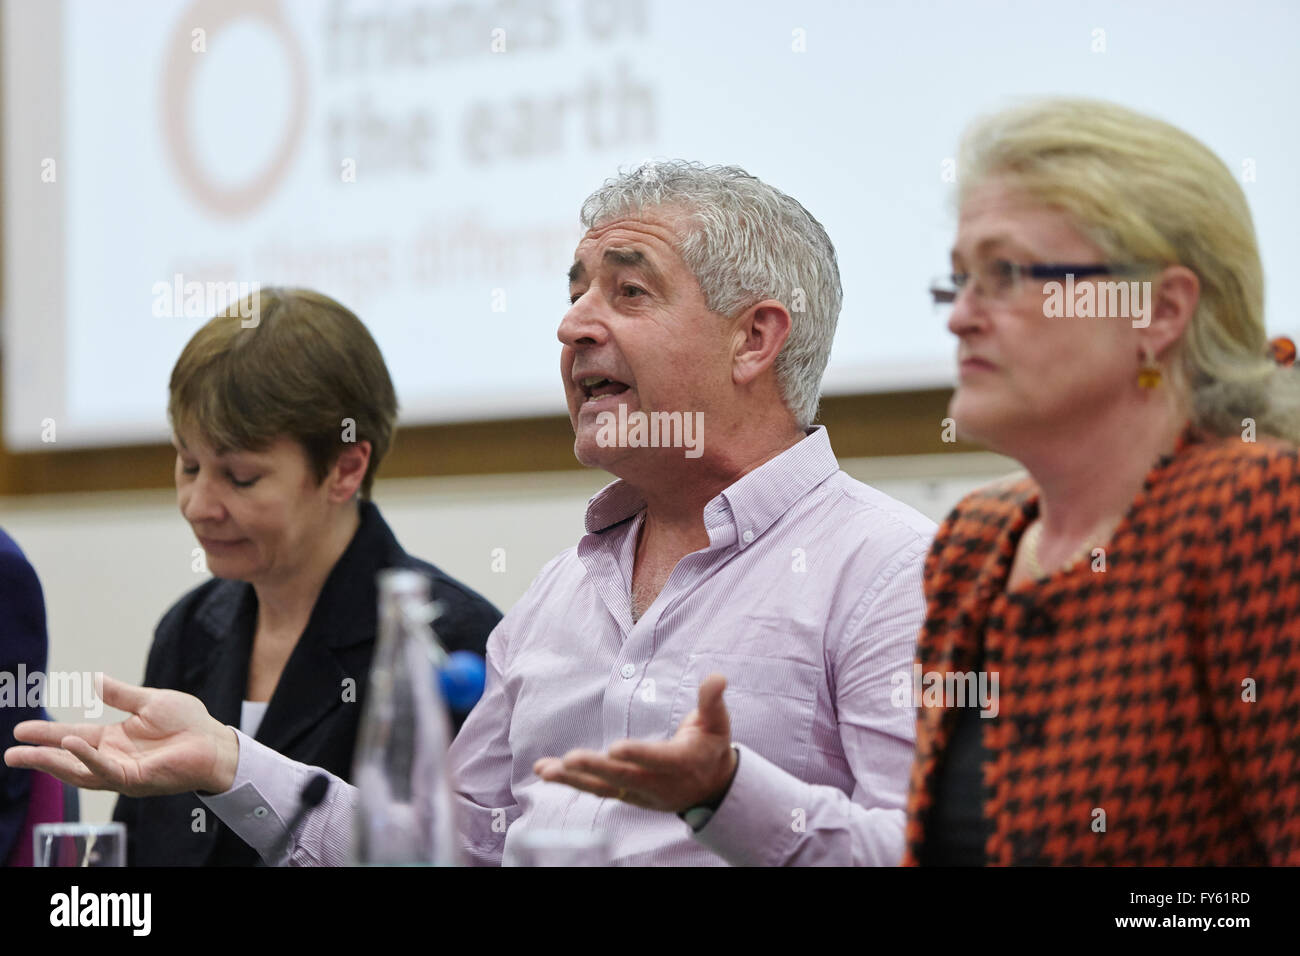 London, UK. 21st April, 2016. The campaigner and environmentalist spoke at a Friends of the Earth / Environmentalists for Europe Remain Campaign Rally. Held at King's College London. UK. 21st April 2016 Credit:  Sam Barnes/Alamy Live News Stock Photo